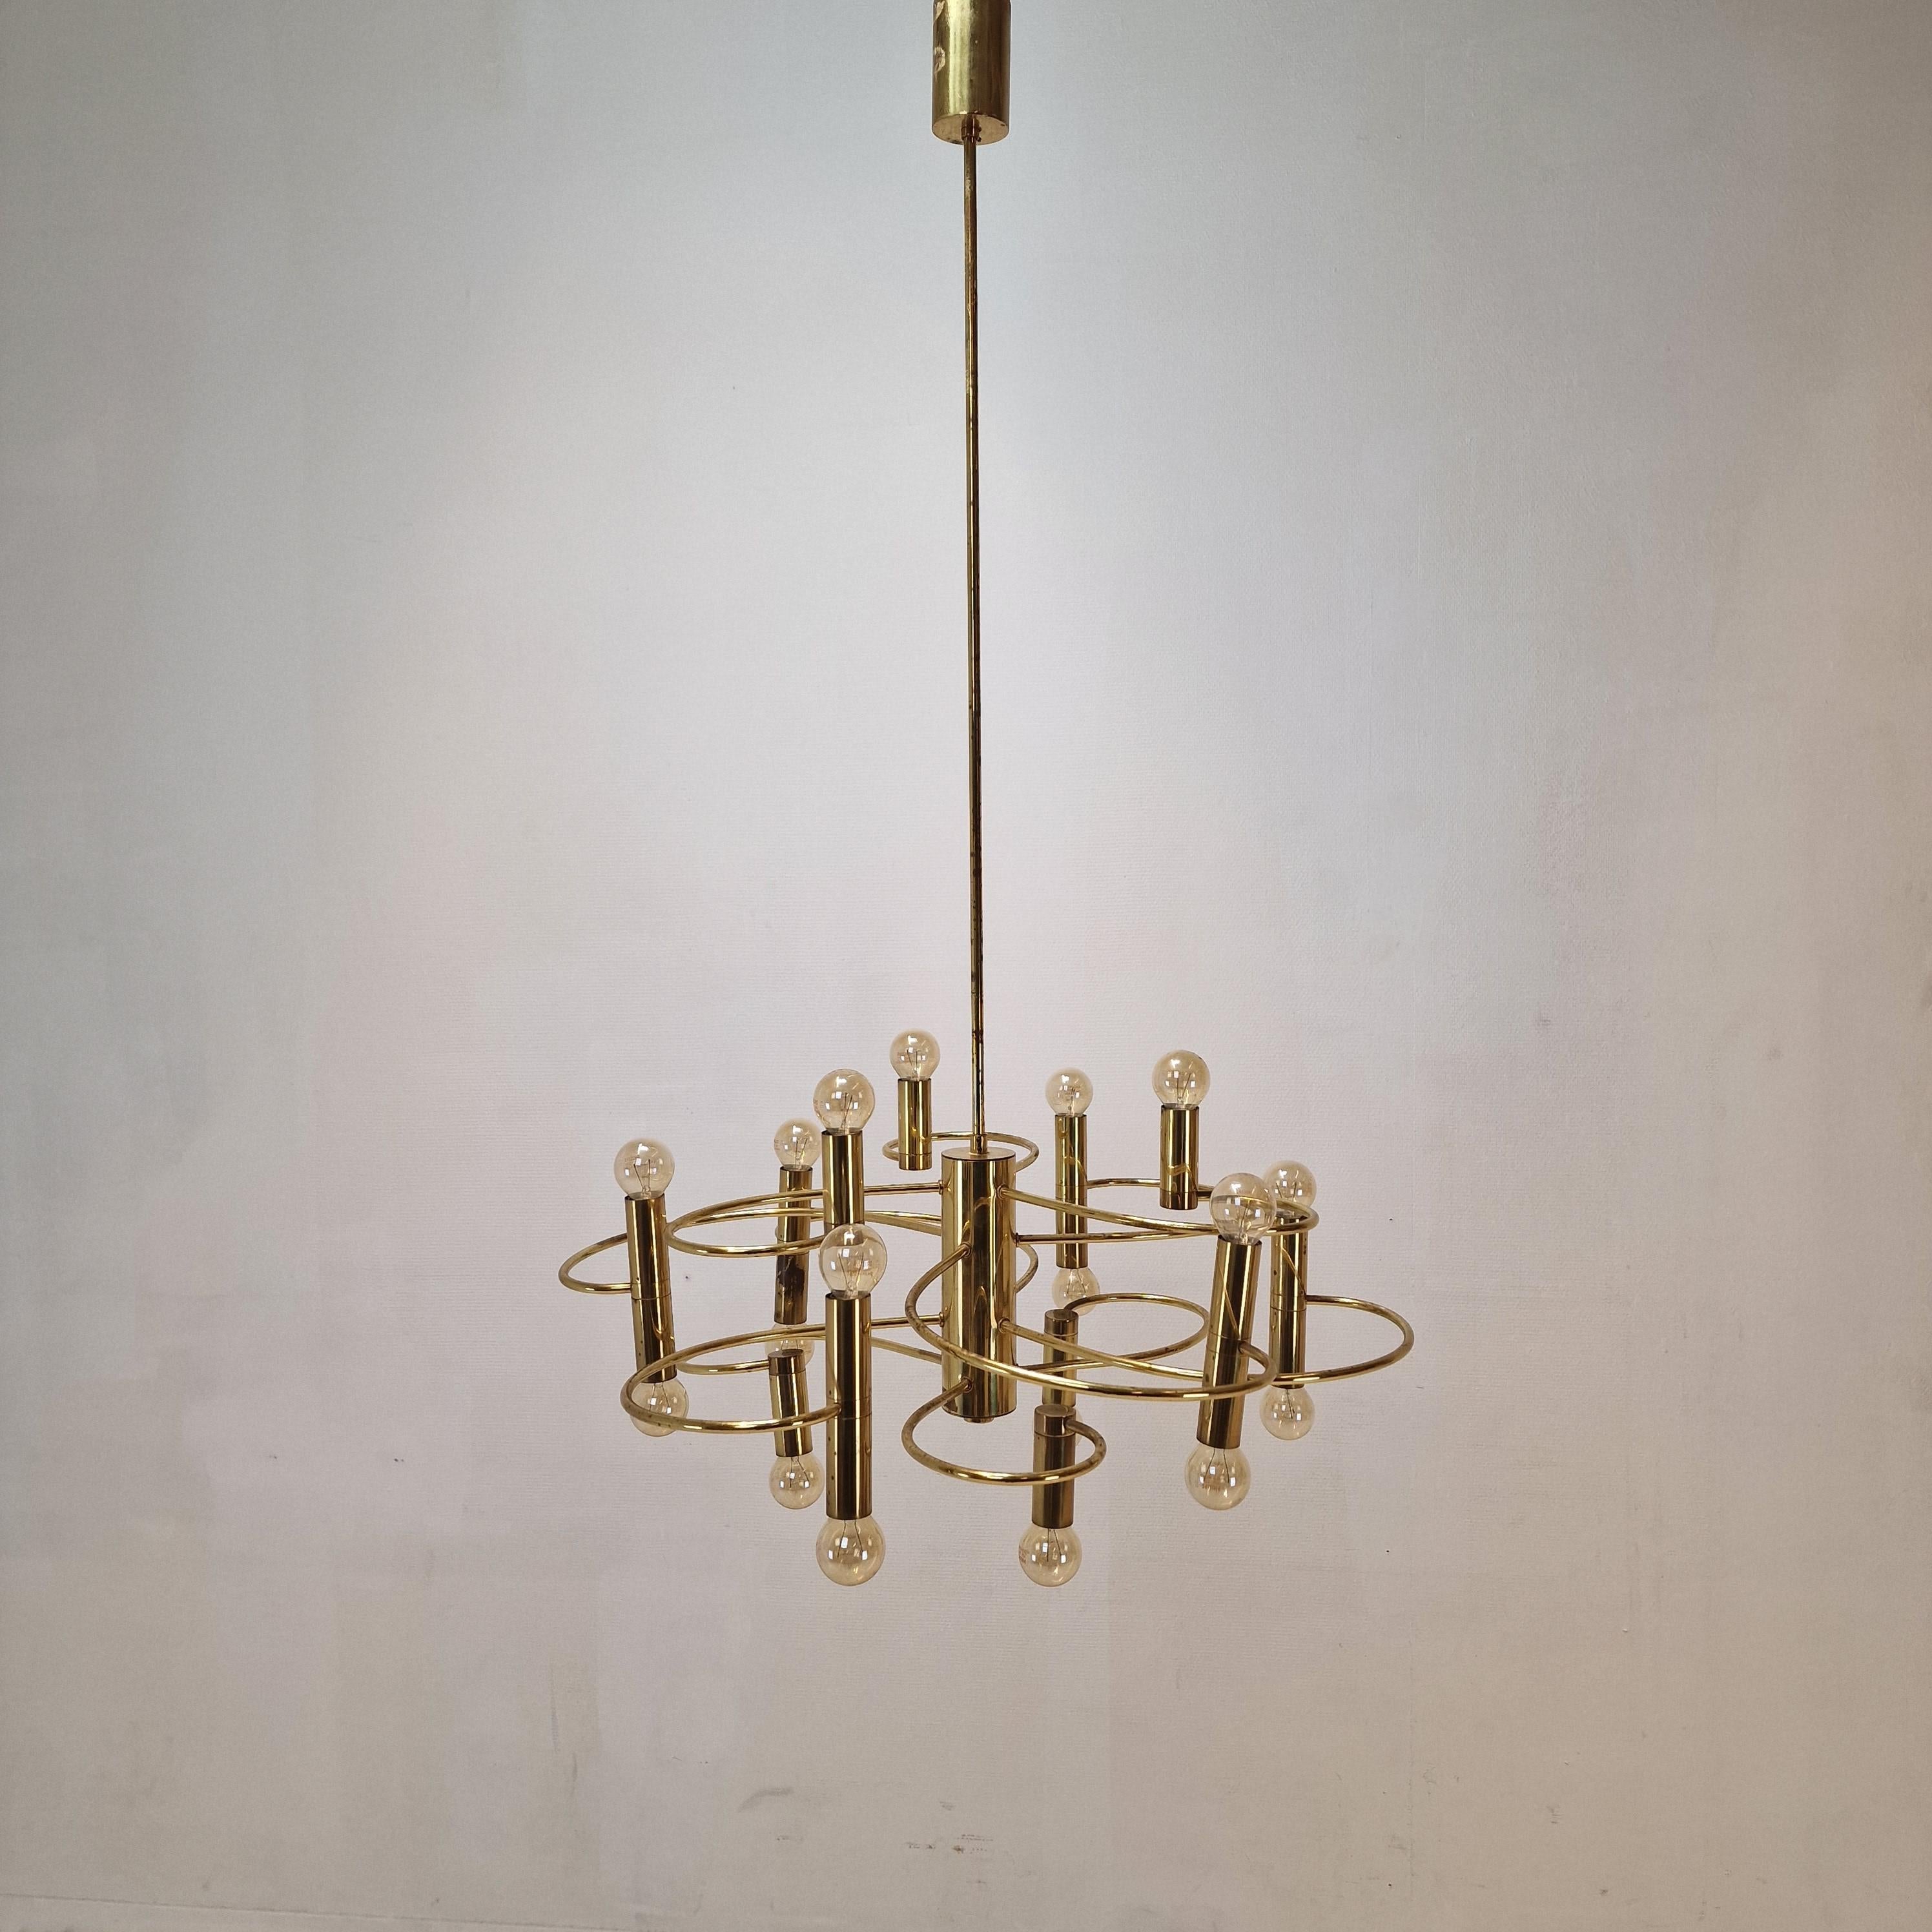 Beautiful Italian pendant fabricated by Sciolari in the 1970s.

The eighteen lights combined with the elegant brass arms makes this lamp a stunning piece.

Good vintage condition, some traces of use.  
The wiring has been checked by a professional